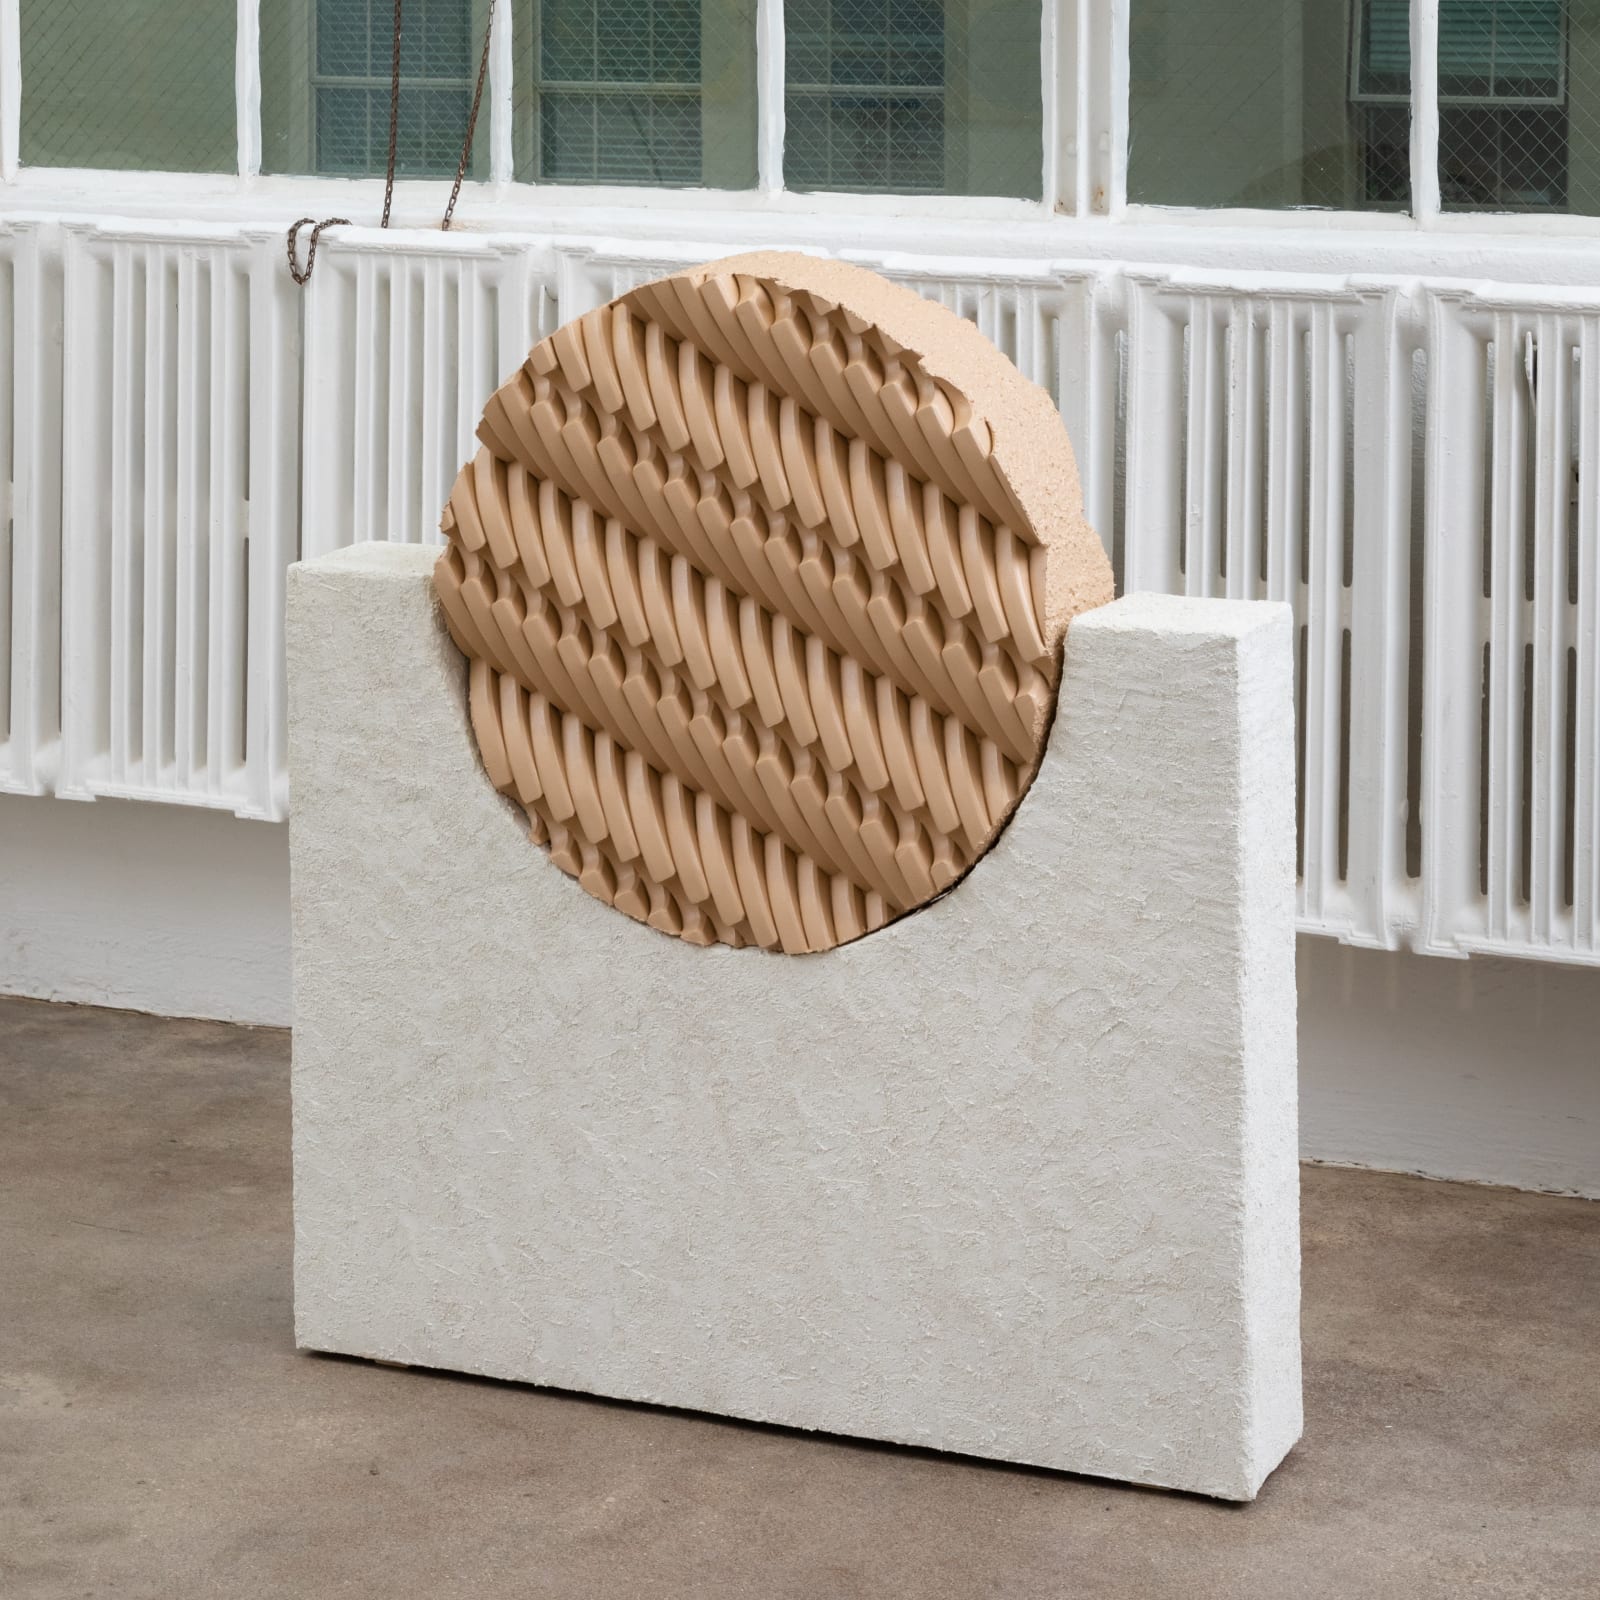 Free-standing sculpture consisting of carved polystyrene and wood pieces aggregated together to form a light tan, interlocking patterned circular form that sits in a white, tall, rectangular stucco base as a support. 